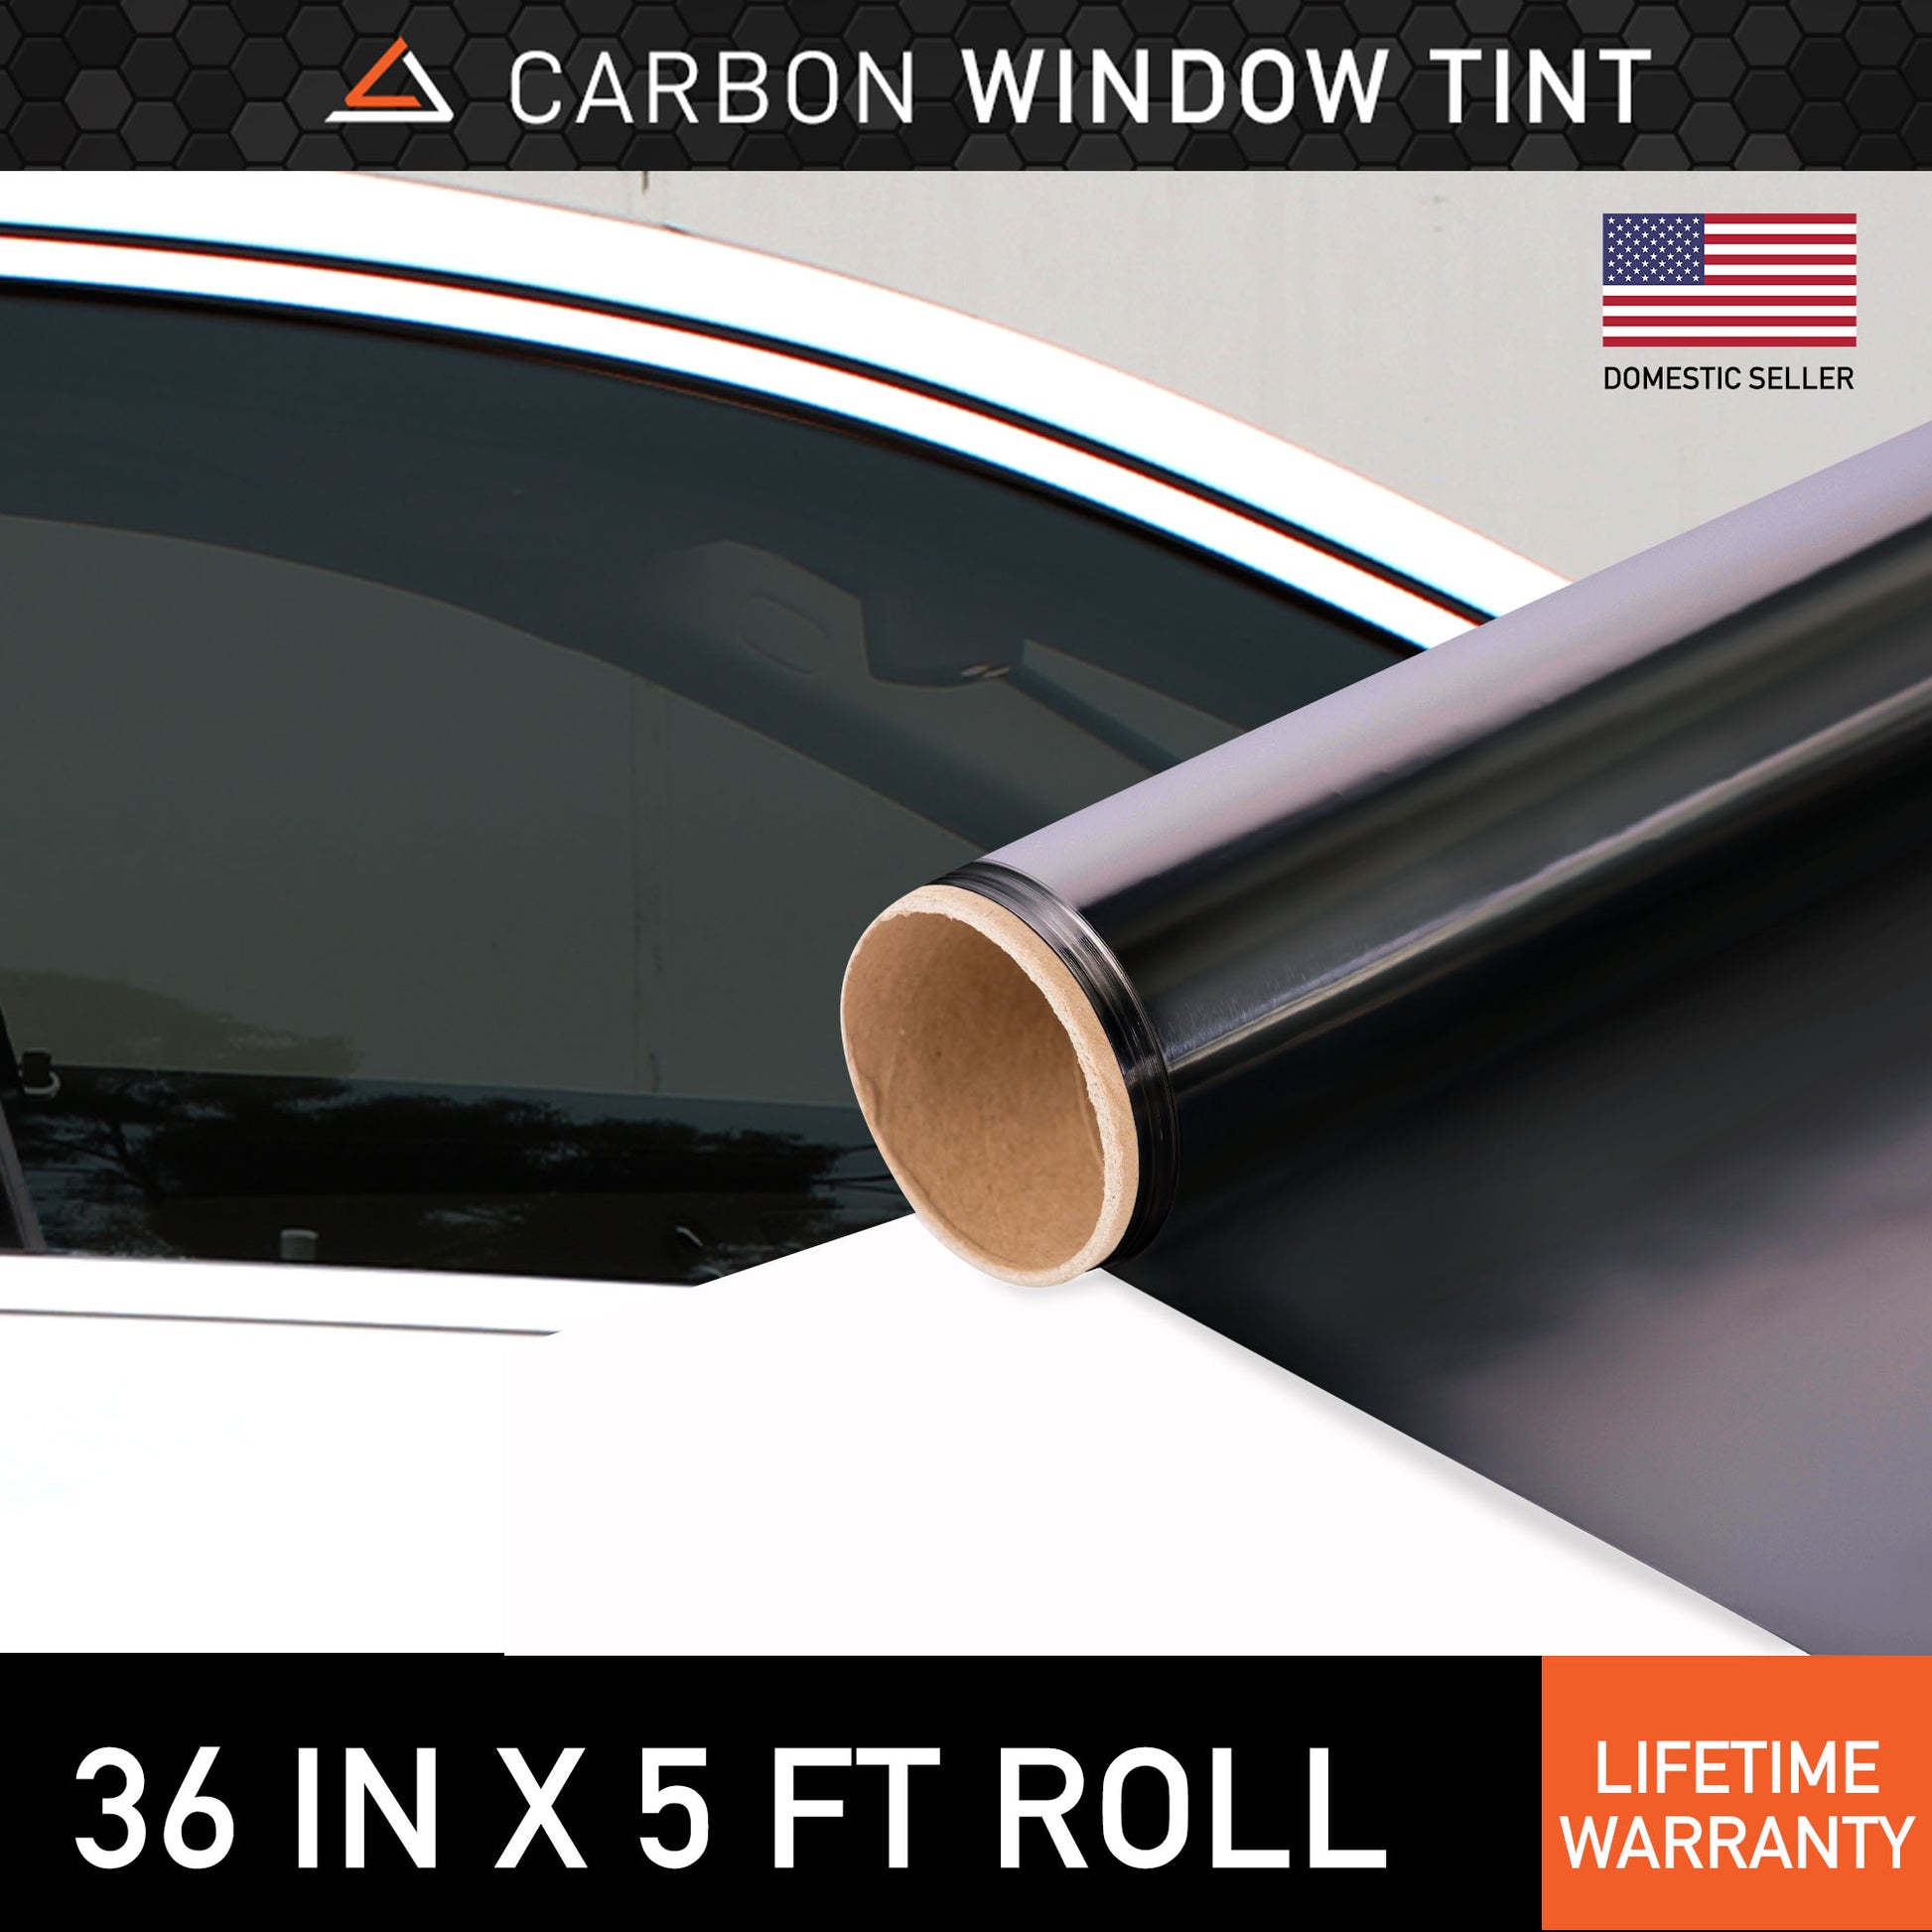 Carbon Window Tint For Auto - 36 in x 5' ft Roll – MotoShield Pro